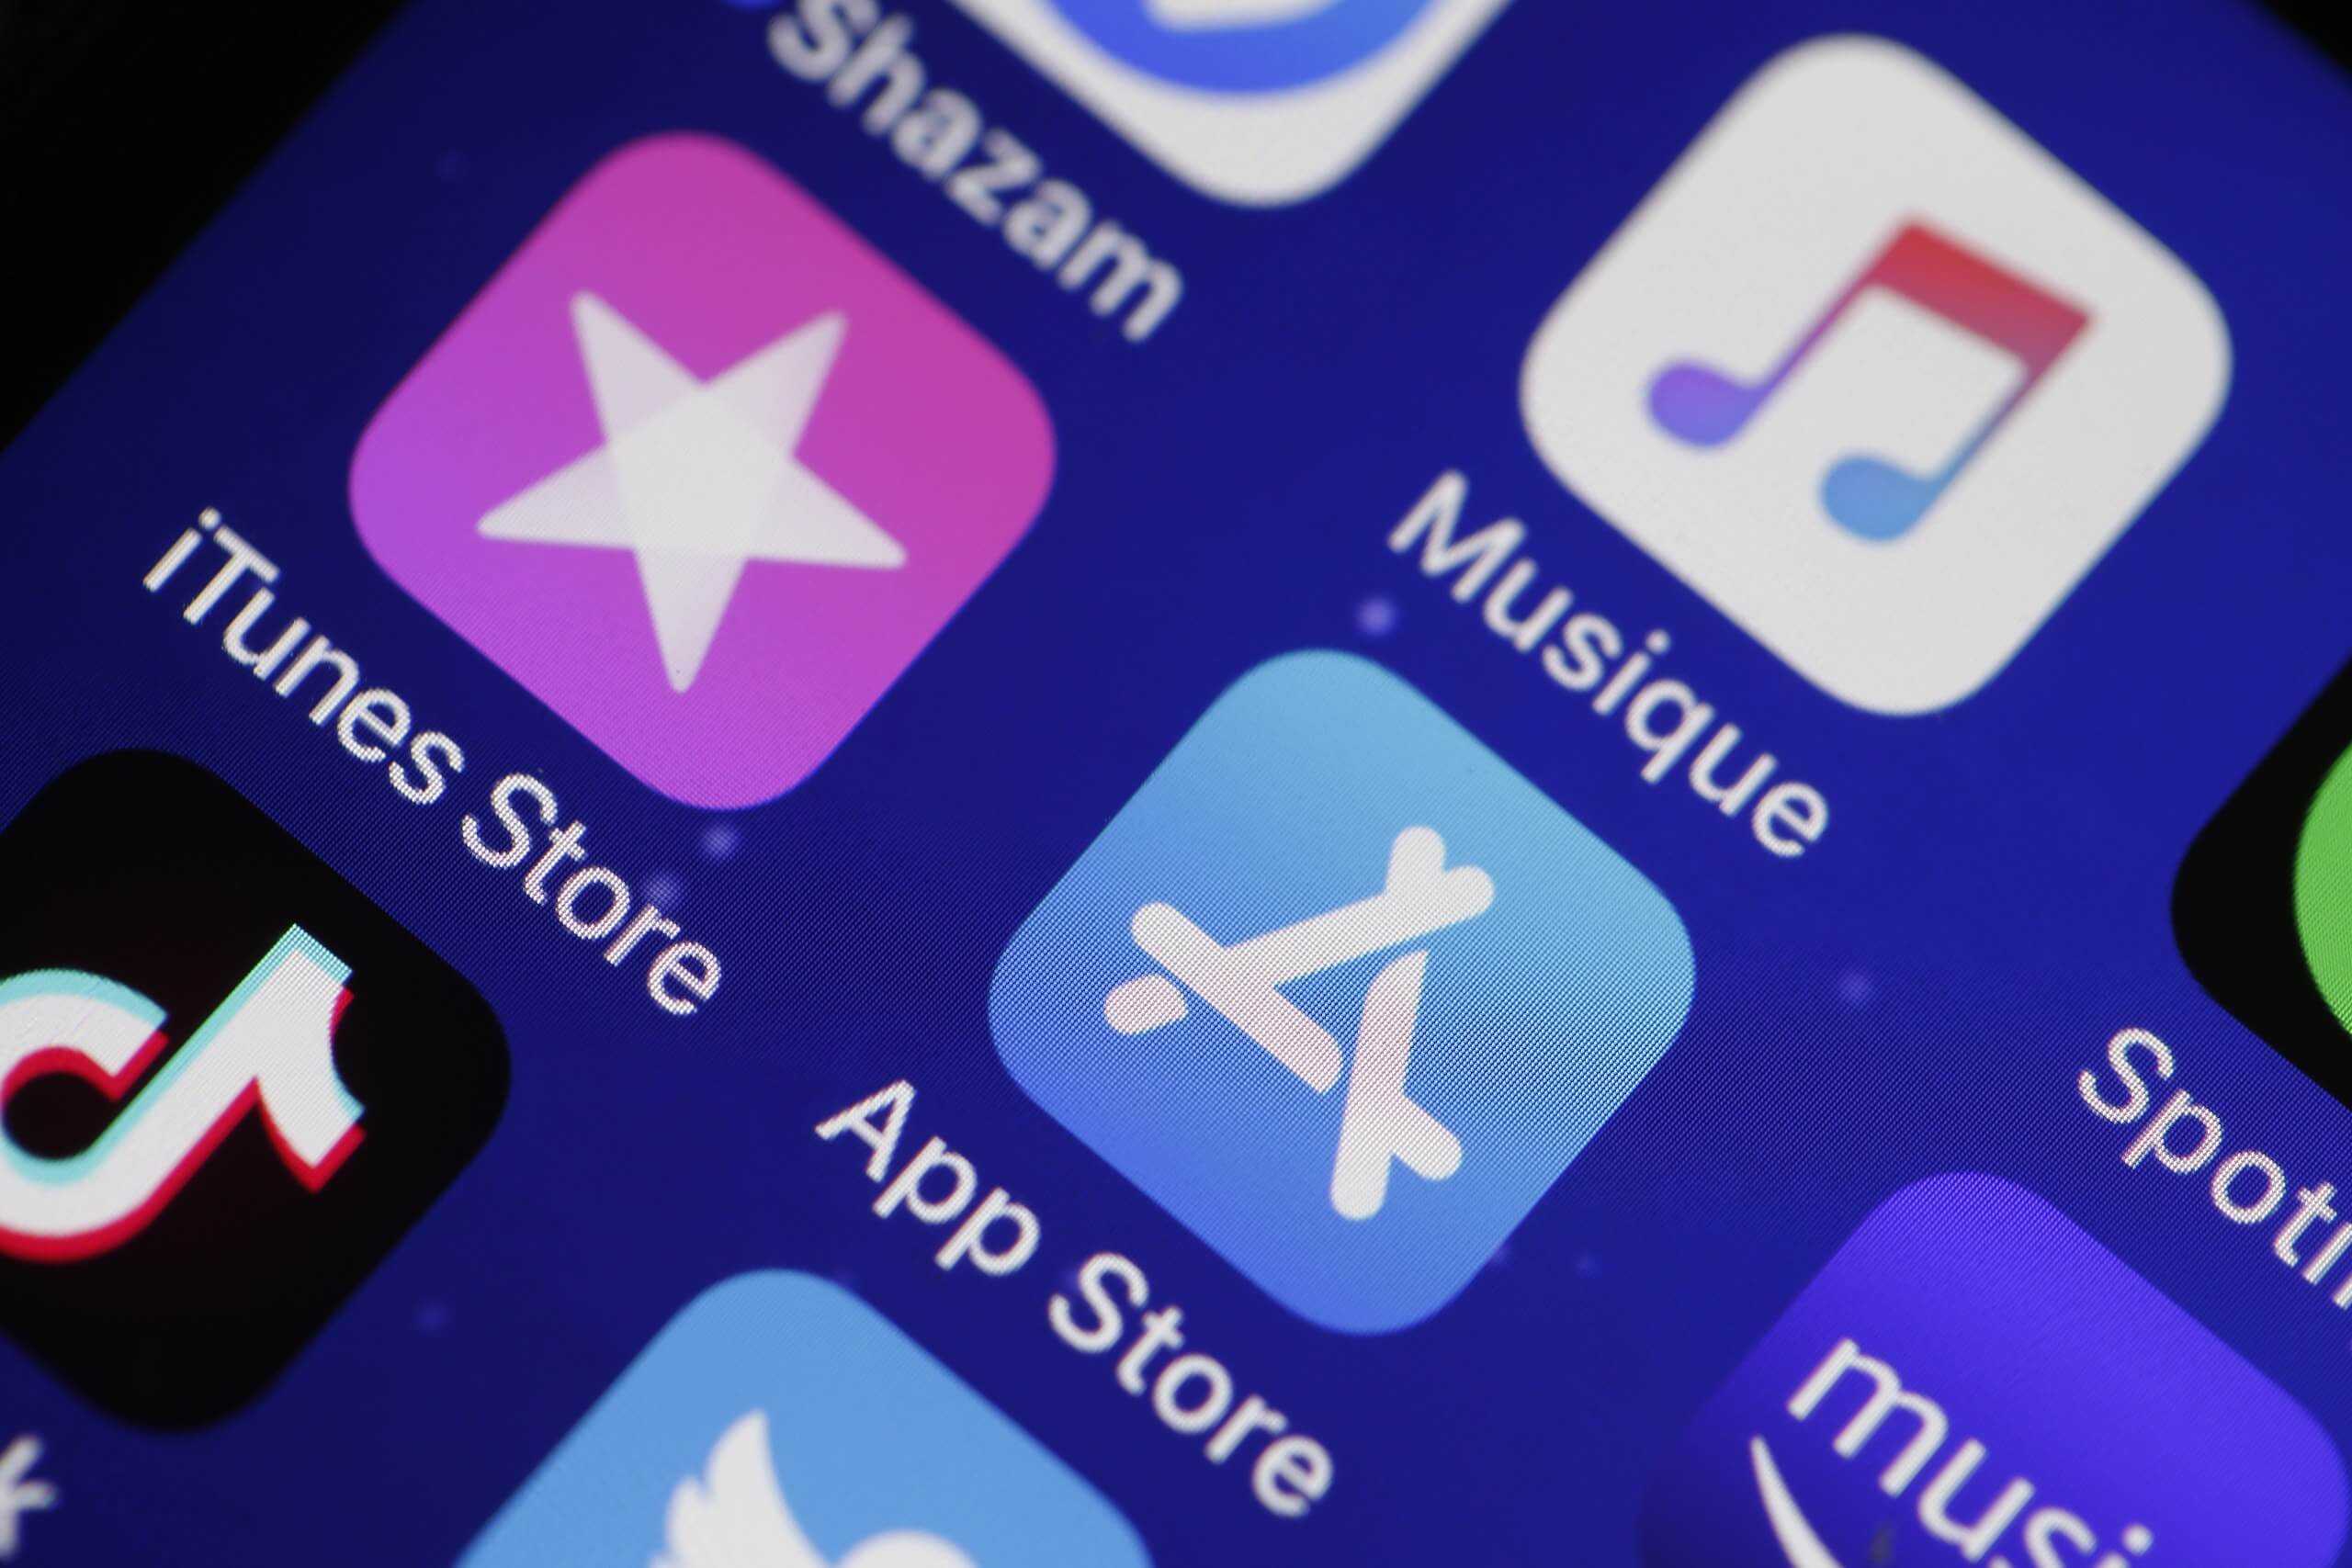 Amazon managed to get a deal to avoid Apple's App Store tax